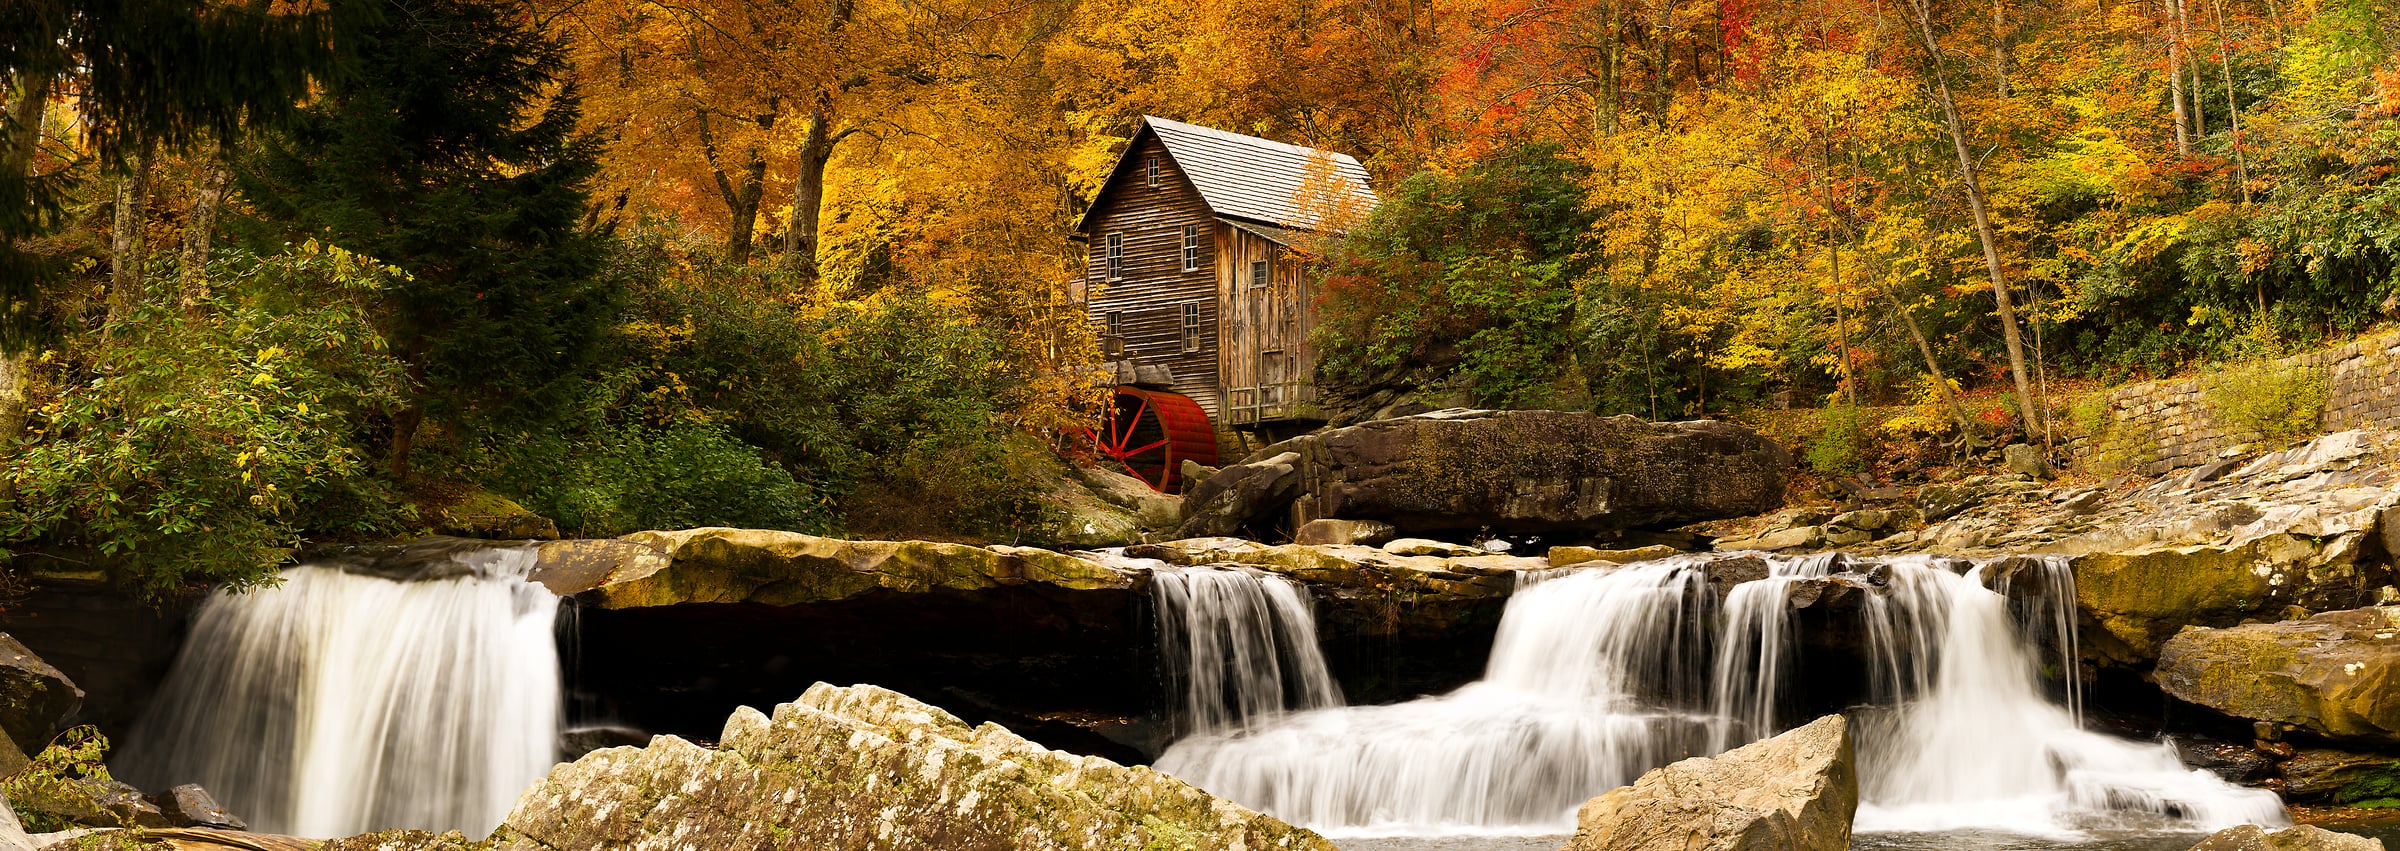 621 megapixels! A very high resolution, large-format VAST photo print of an autumn scene with fall foliage, a watermill, a forest, and waterfalls; landscape nature photograph created by David David at Glade Creek Grist Mill in Babcock State Park, West Virginia.